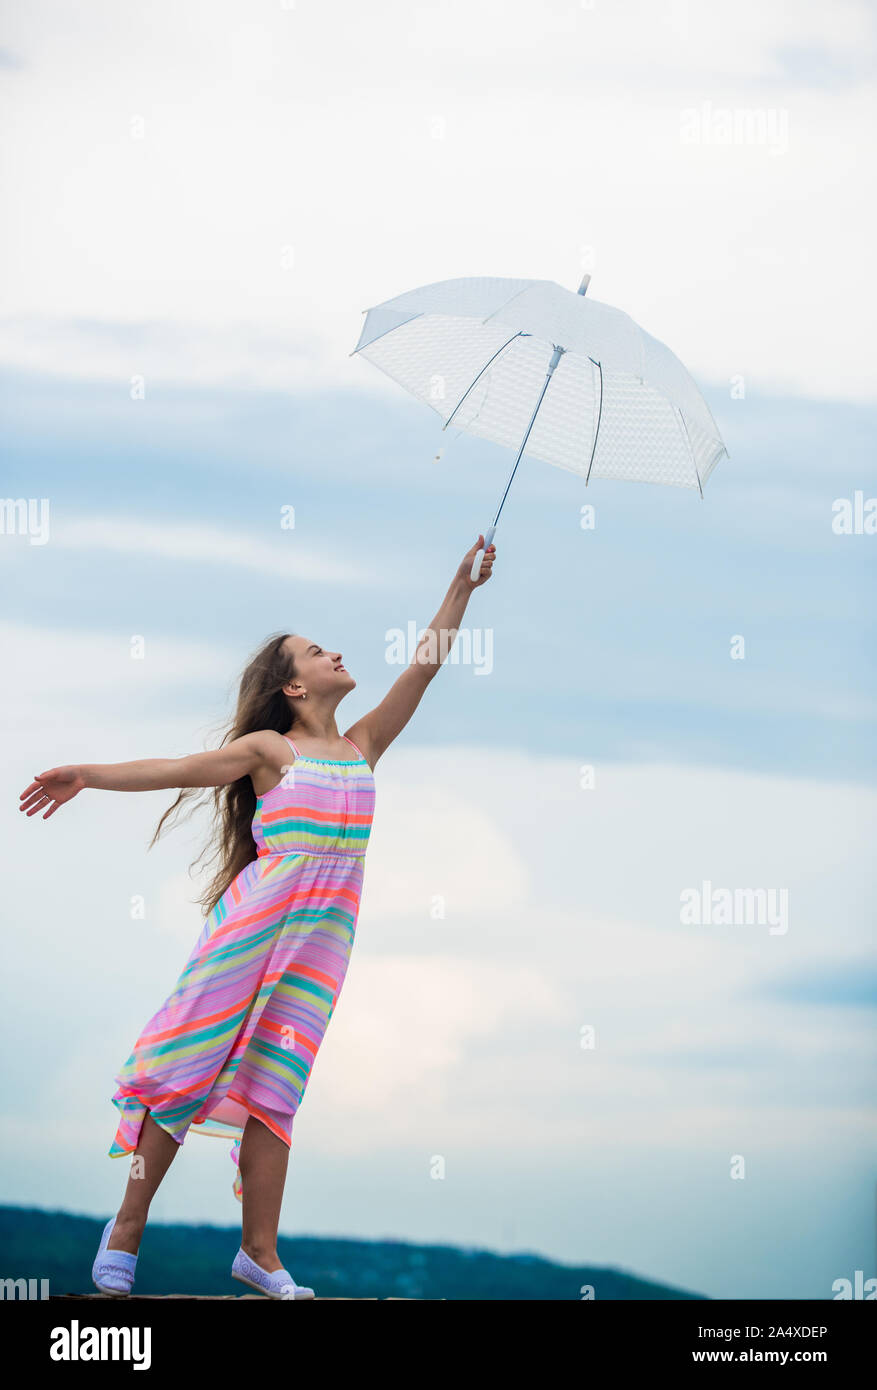 Touch sky. Girl with light umbrella. Fairy tale character. Happy childhood. Feeling light. Anti gravitation. Fly drop parachute. Dreaming about first flight. Kid pretending fly. I believe i can fly. Stock Photo